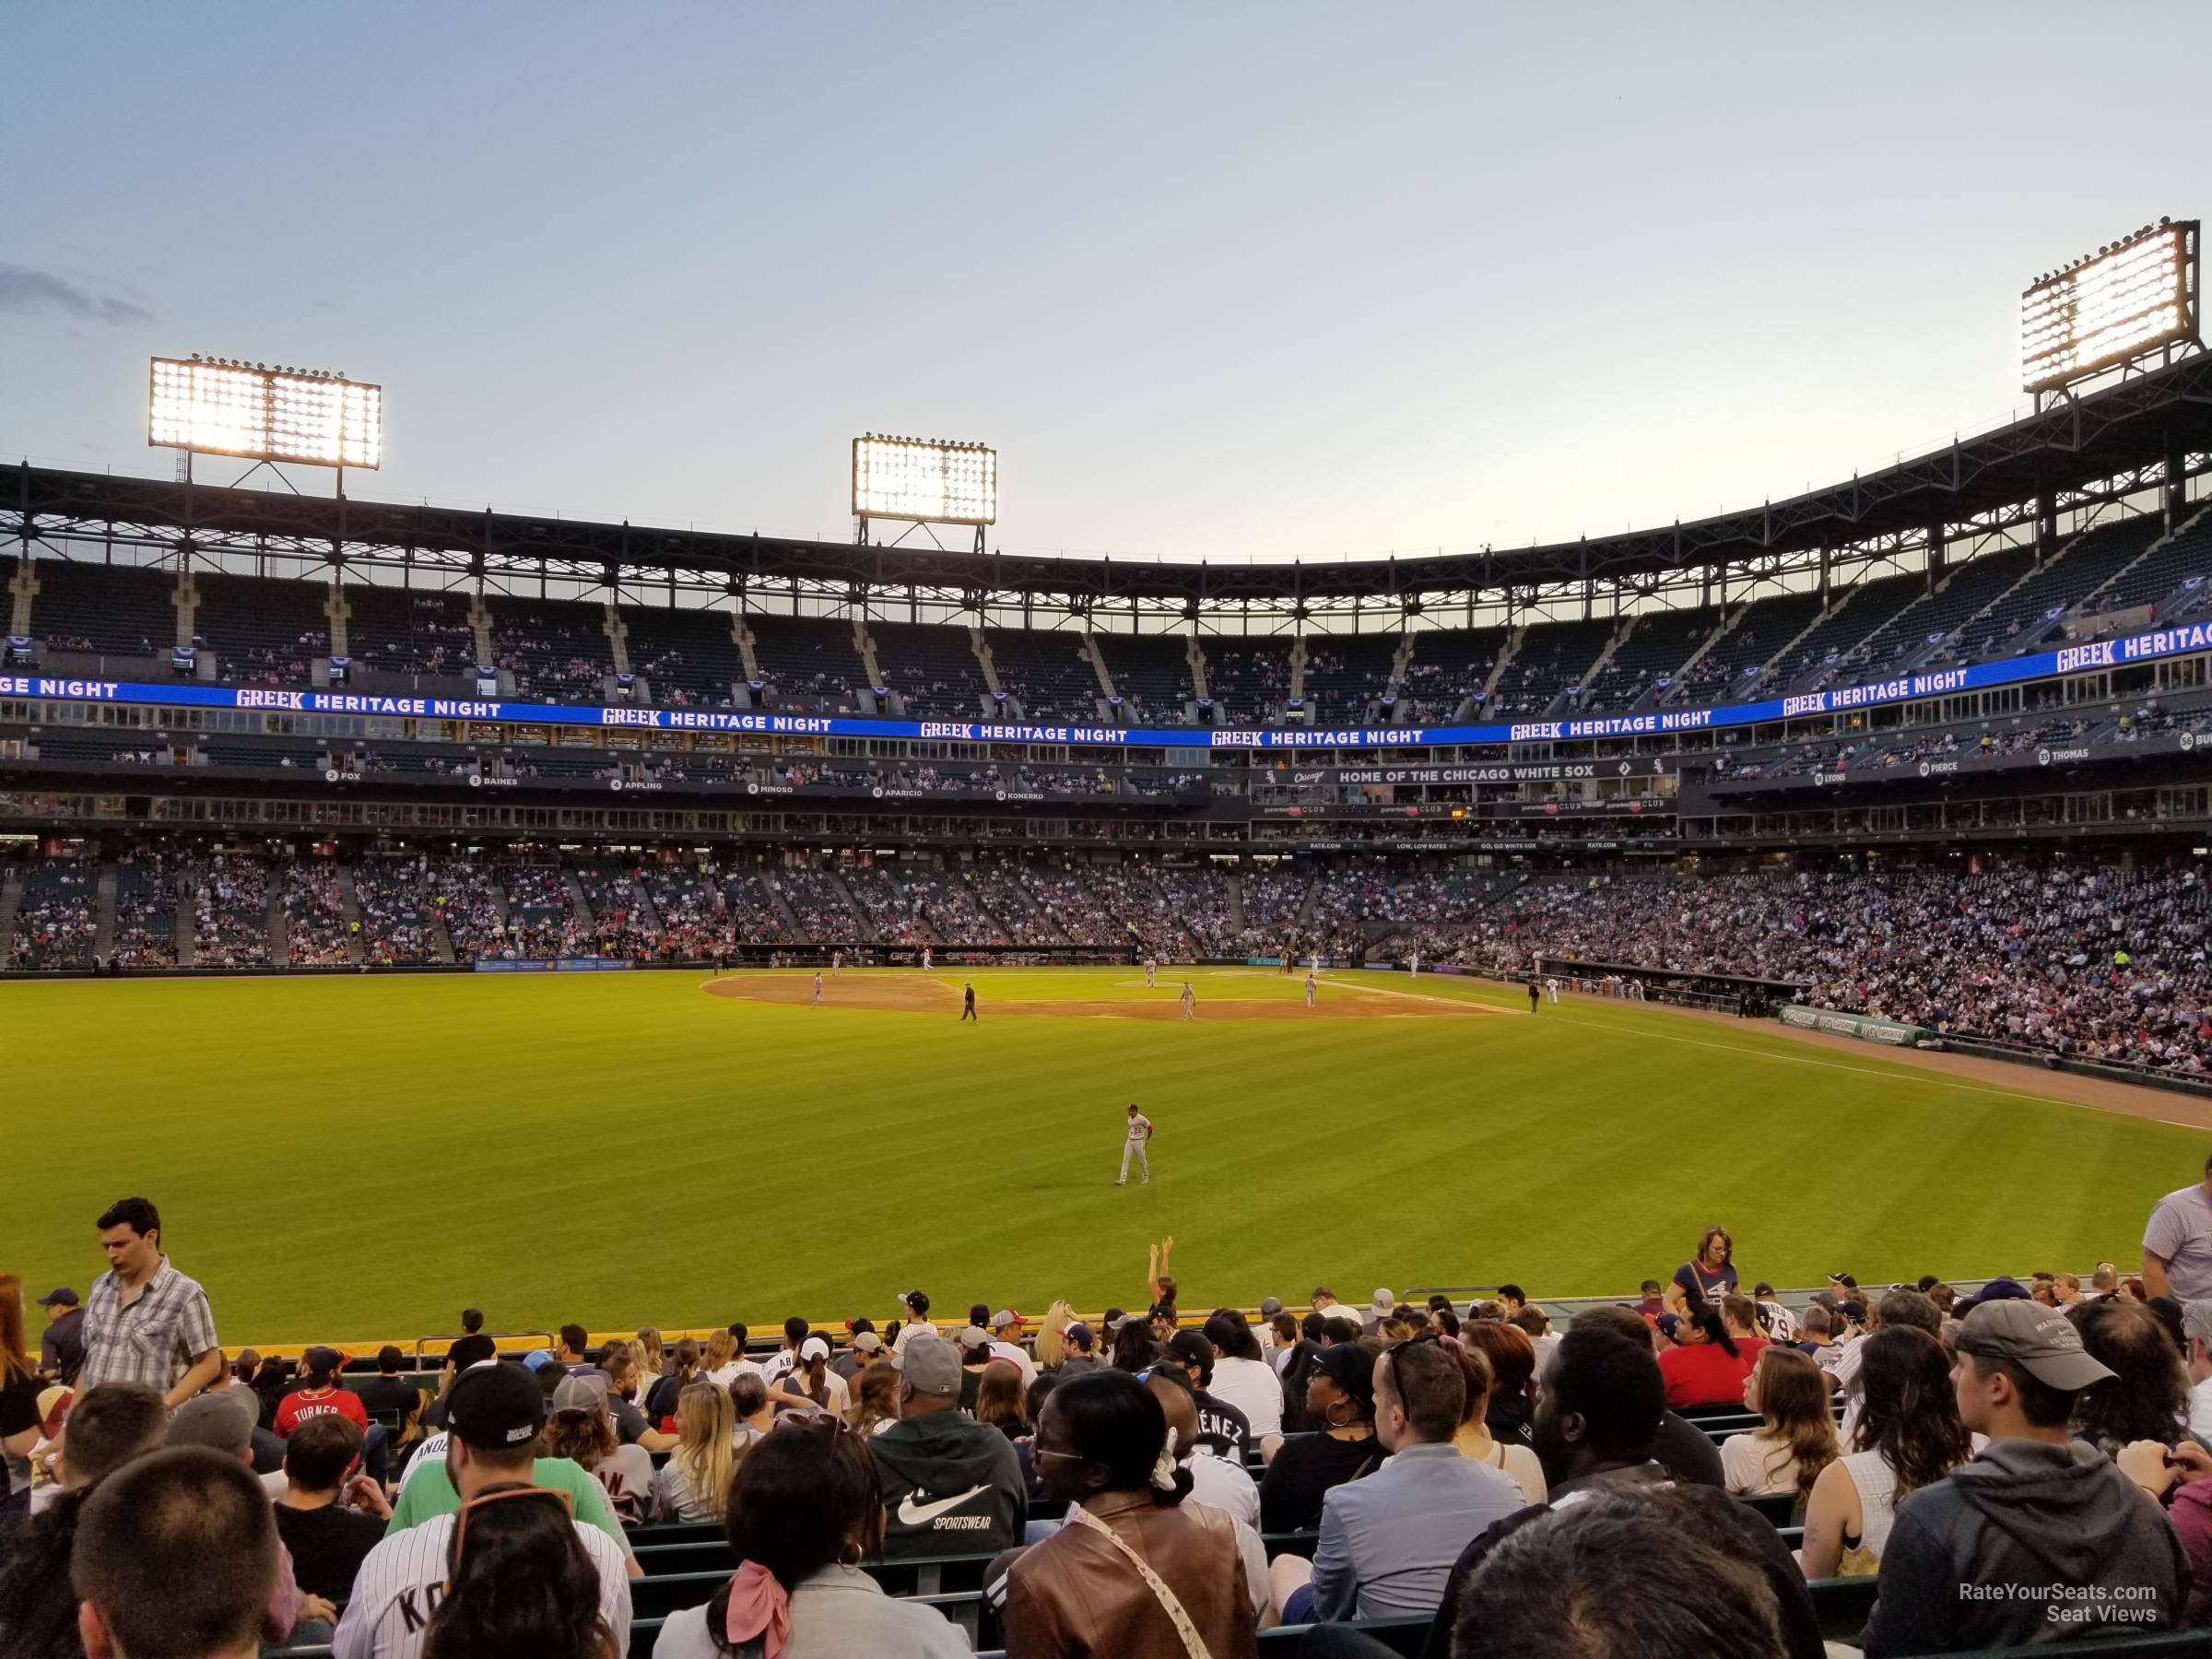 detailed guaranteed rate field seating chart